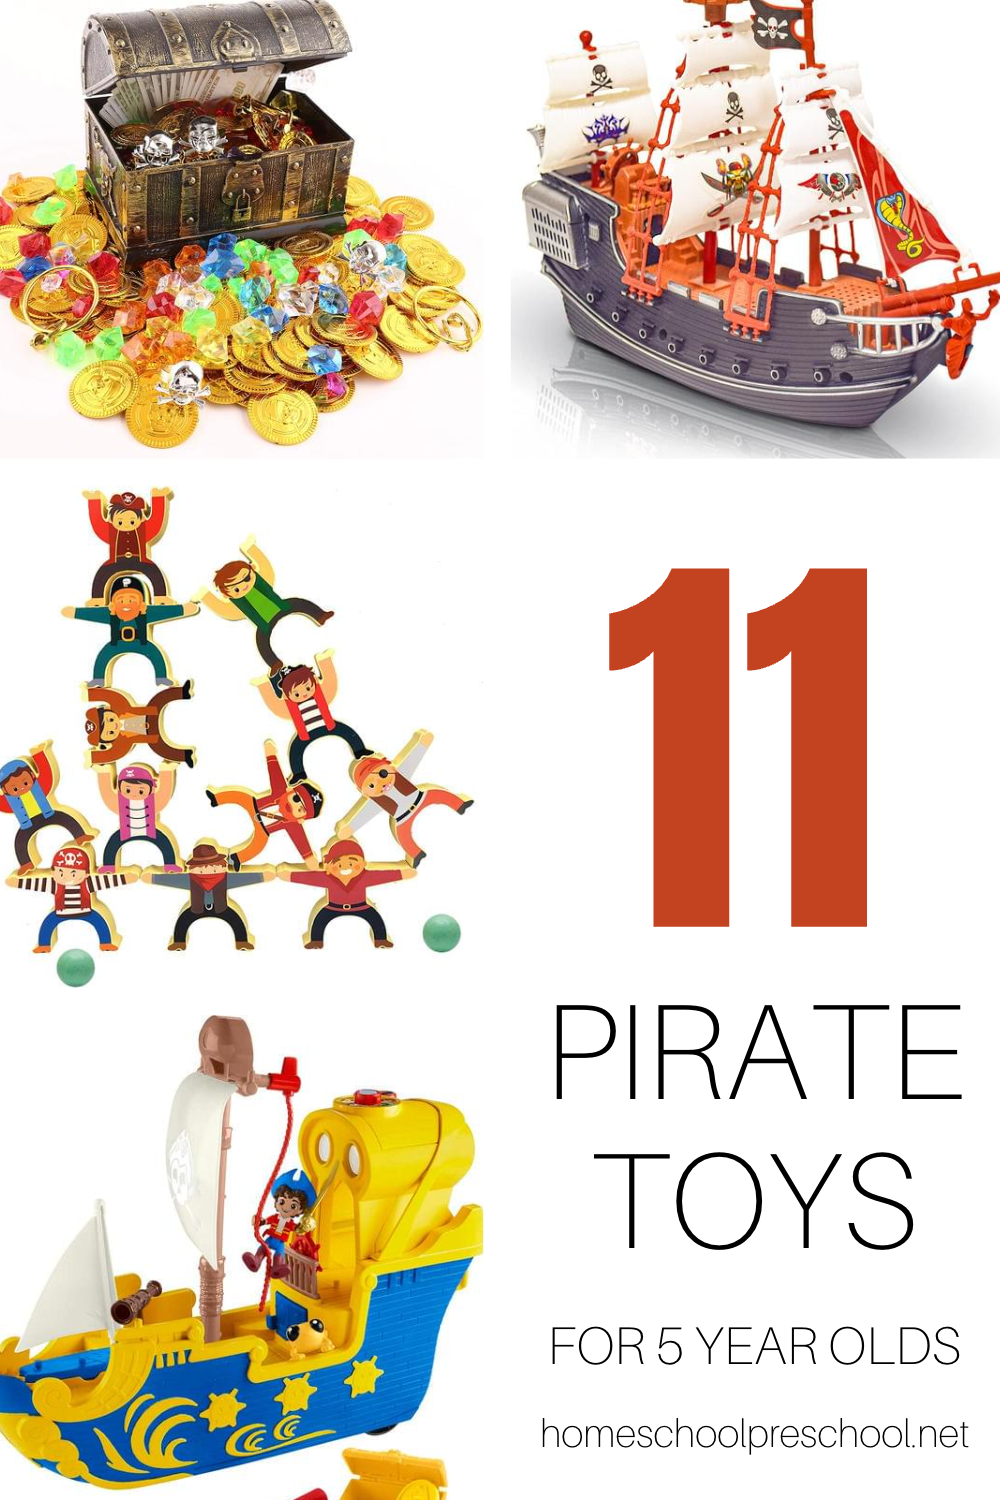 pirates-for-kids Pirate Toys for 5 Year Olds